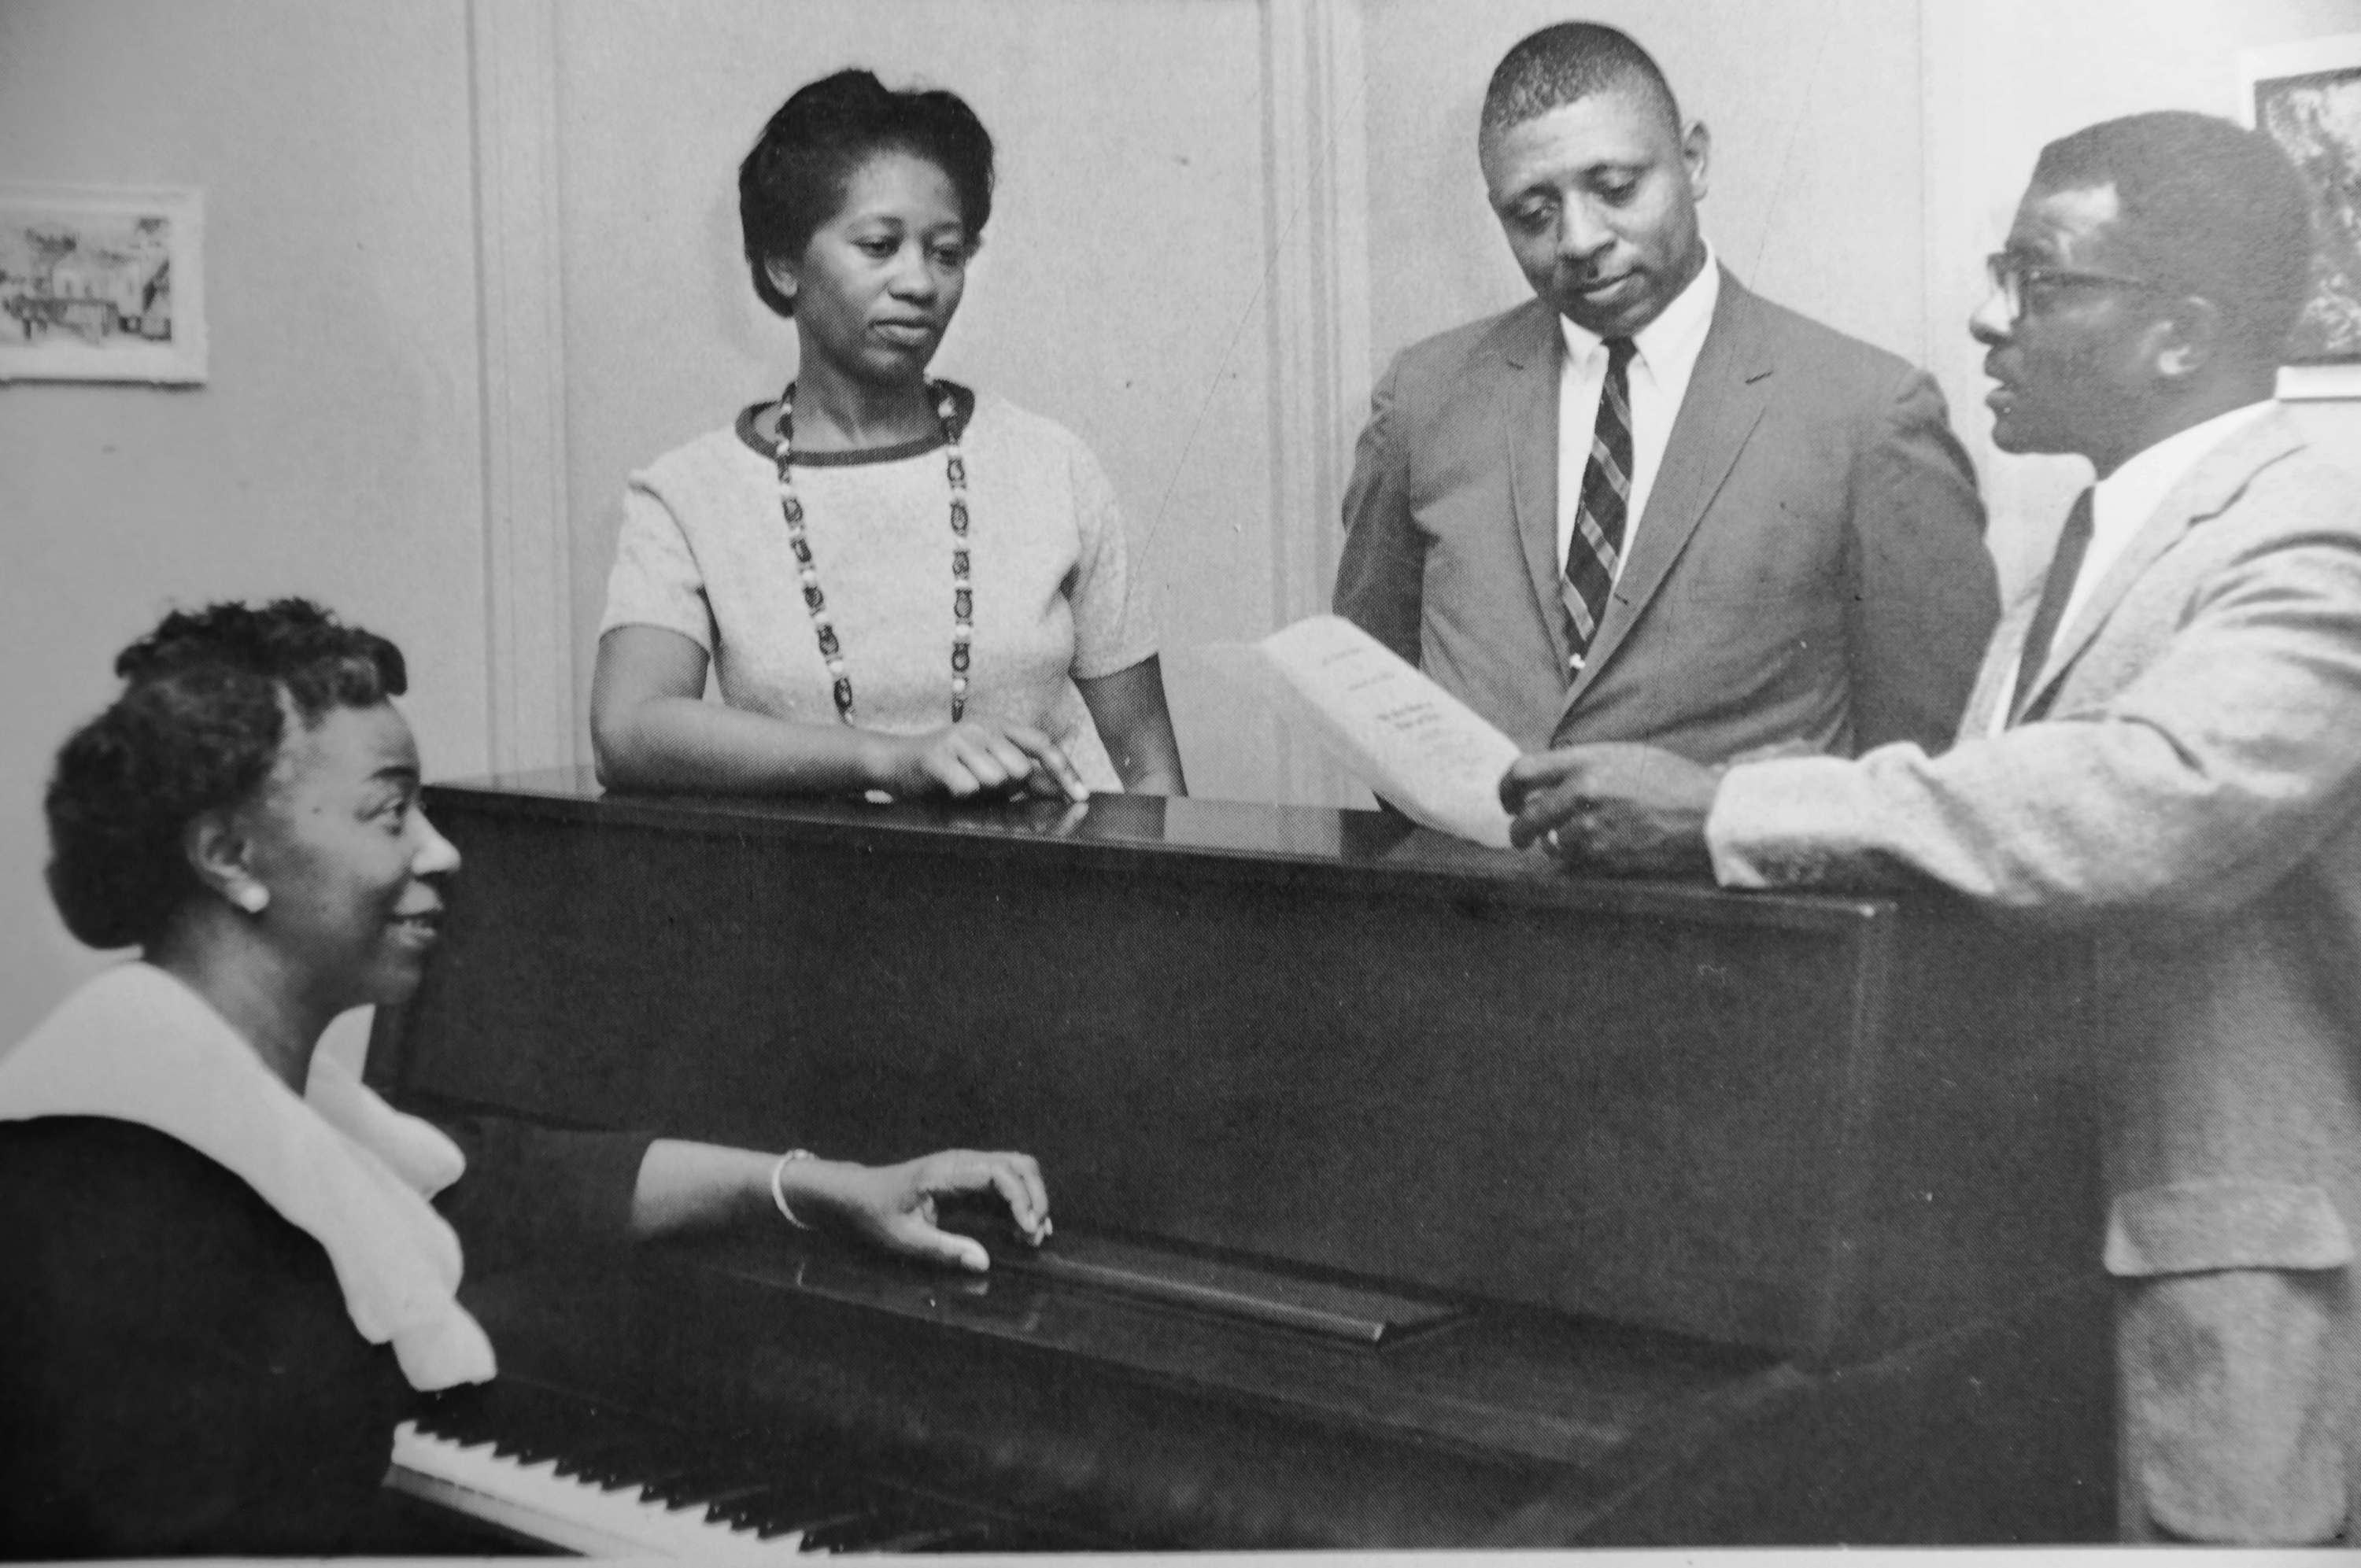 Dr. Howard Brockington (far right) with (l-r) Beatrice Henry, Mable Morrison and Ruppert Stone, circa 1966.